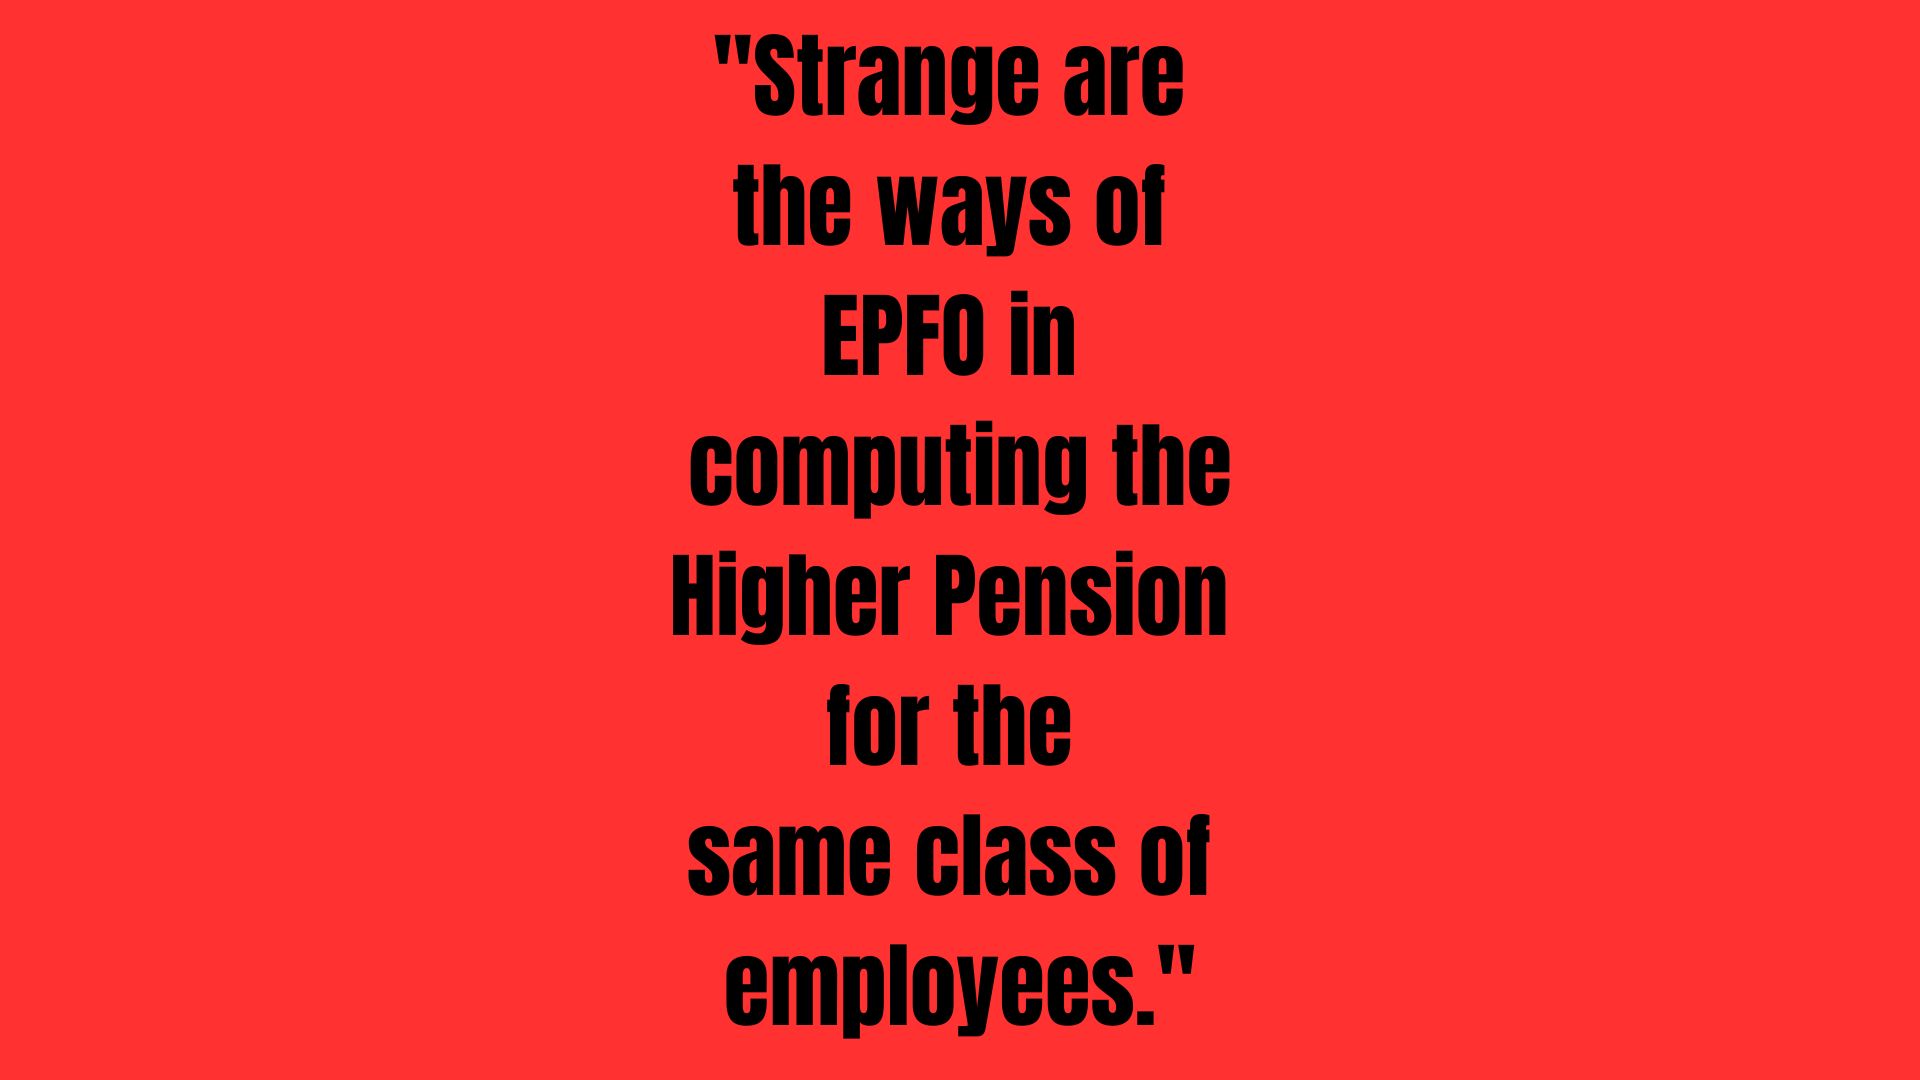 Strange are the ways of EPFO in computing the Higher Pension for the same class of employees.